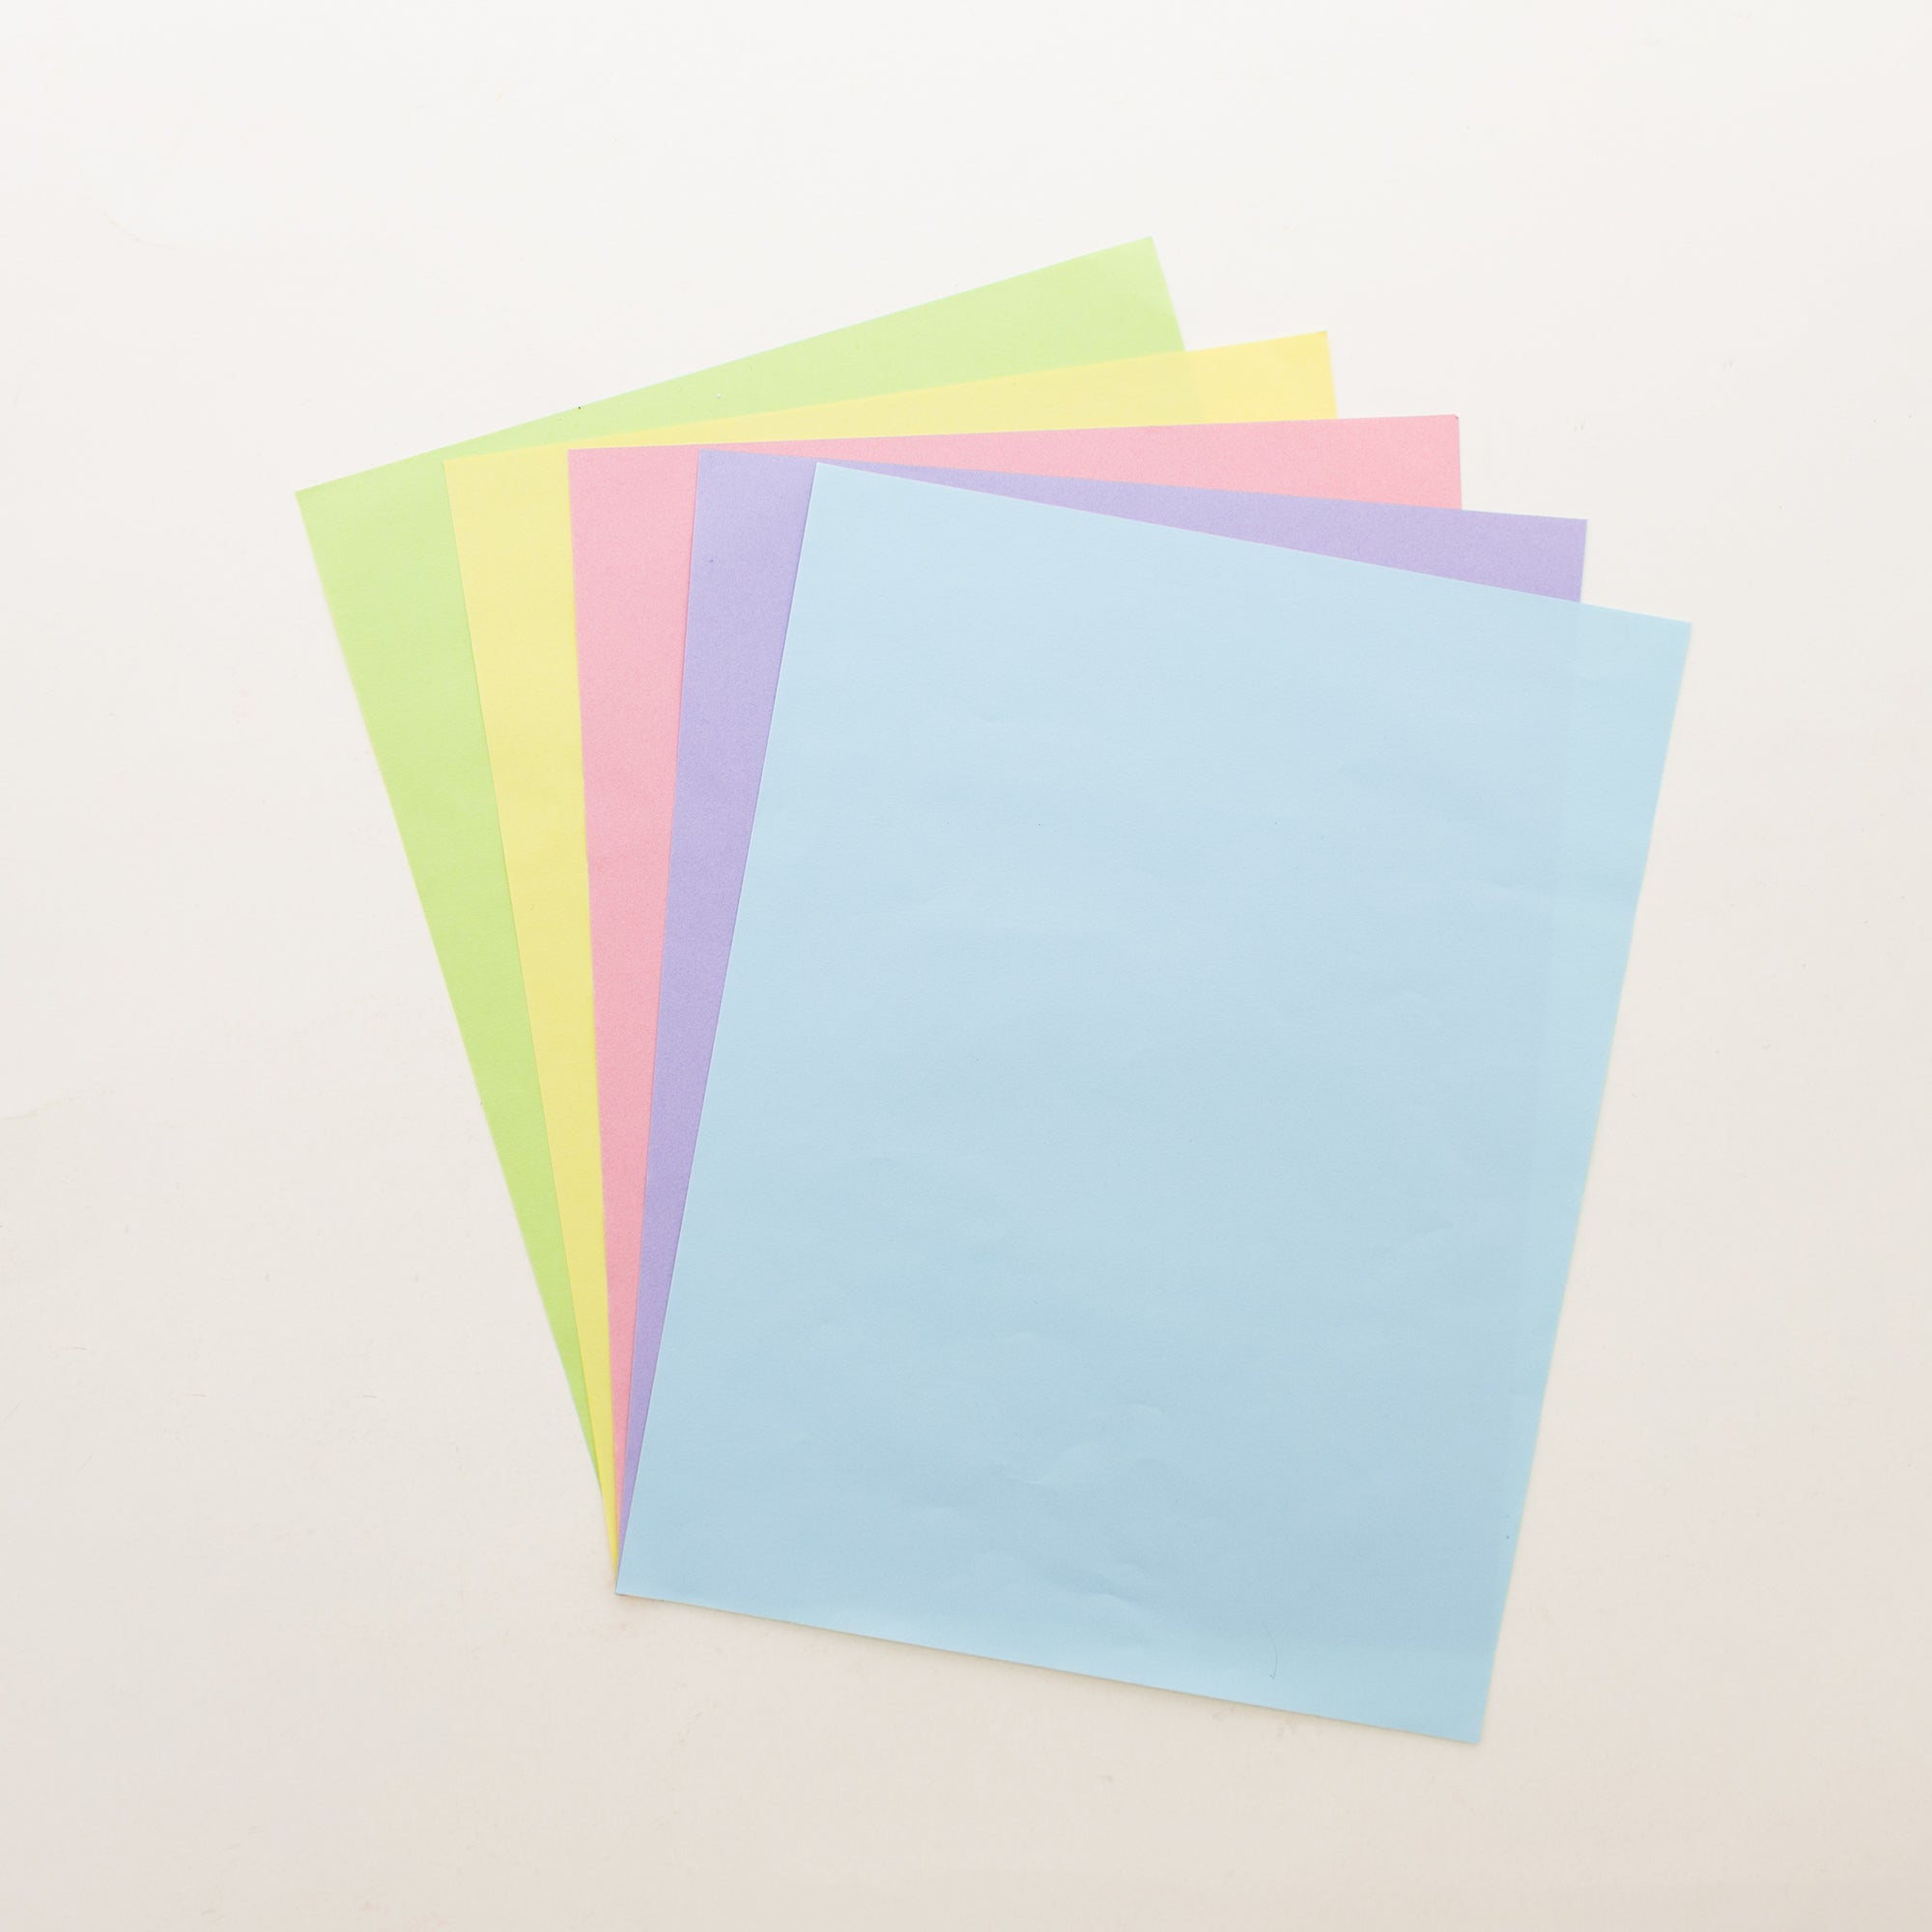 Staples Pastel Colored Copy Paper 8 12 x 11 Assorted Oman